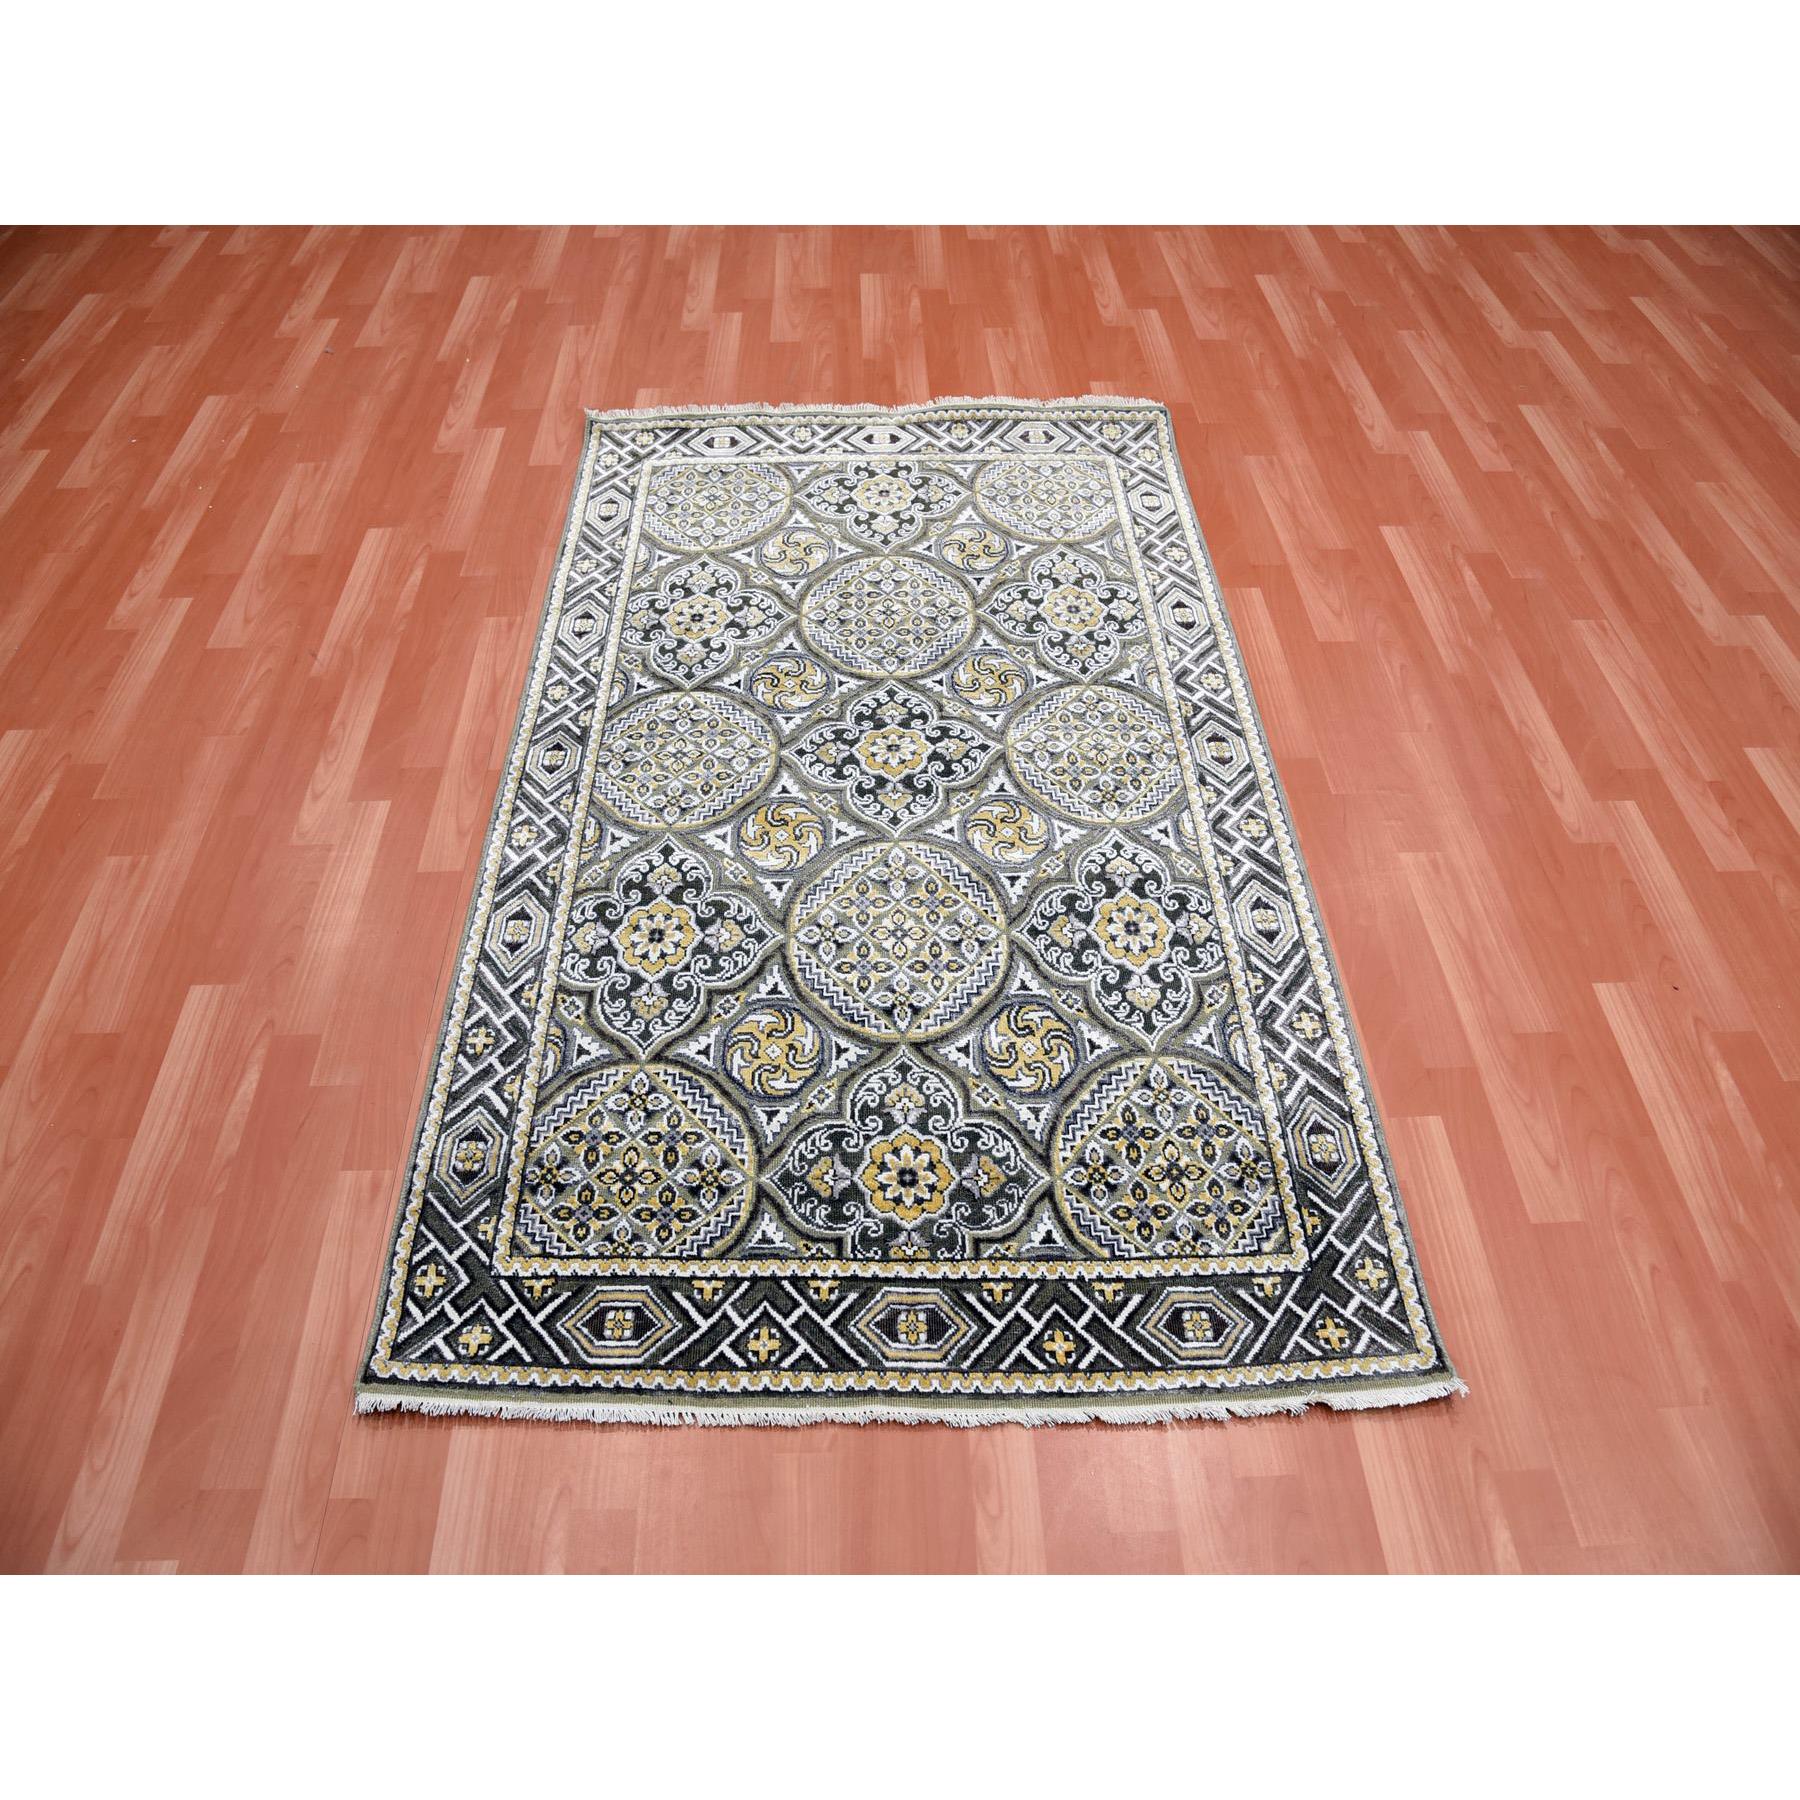 4'x6'2" Taupe-Brown Mughal Inspired Medallions Design Textured Wool and Silk Hand Woven Oriental Rug 